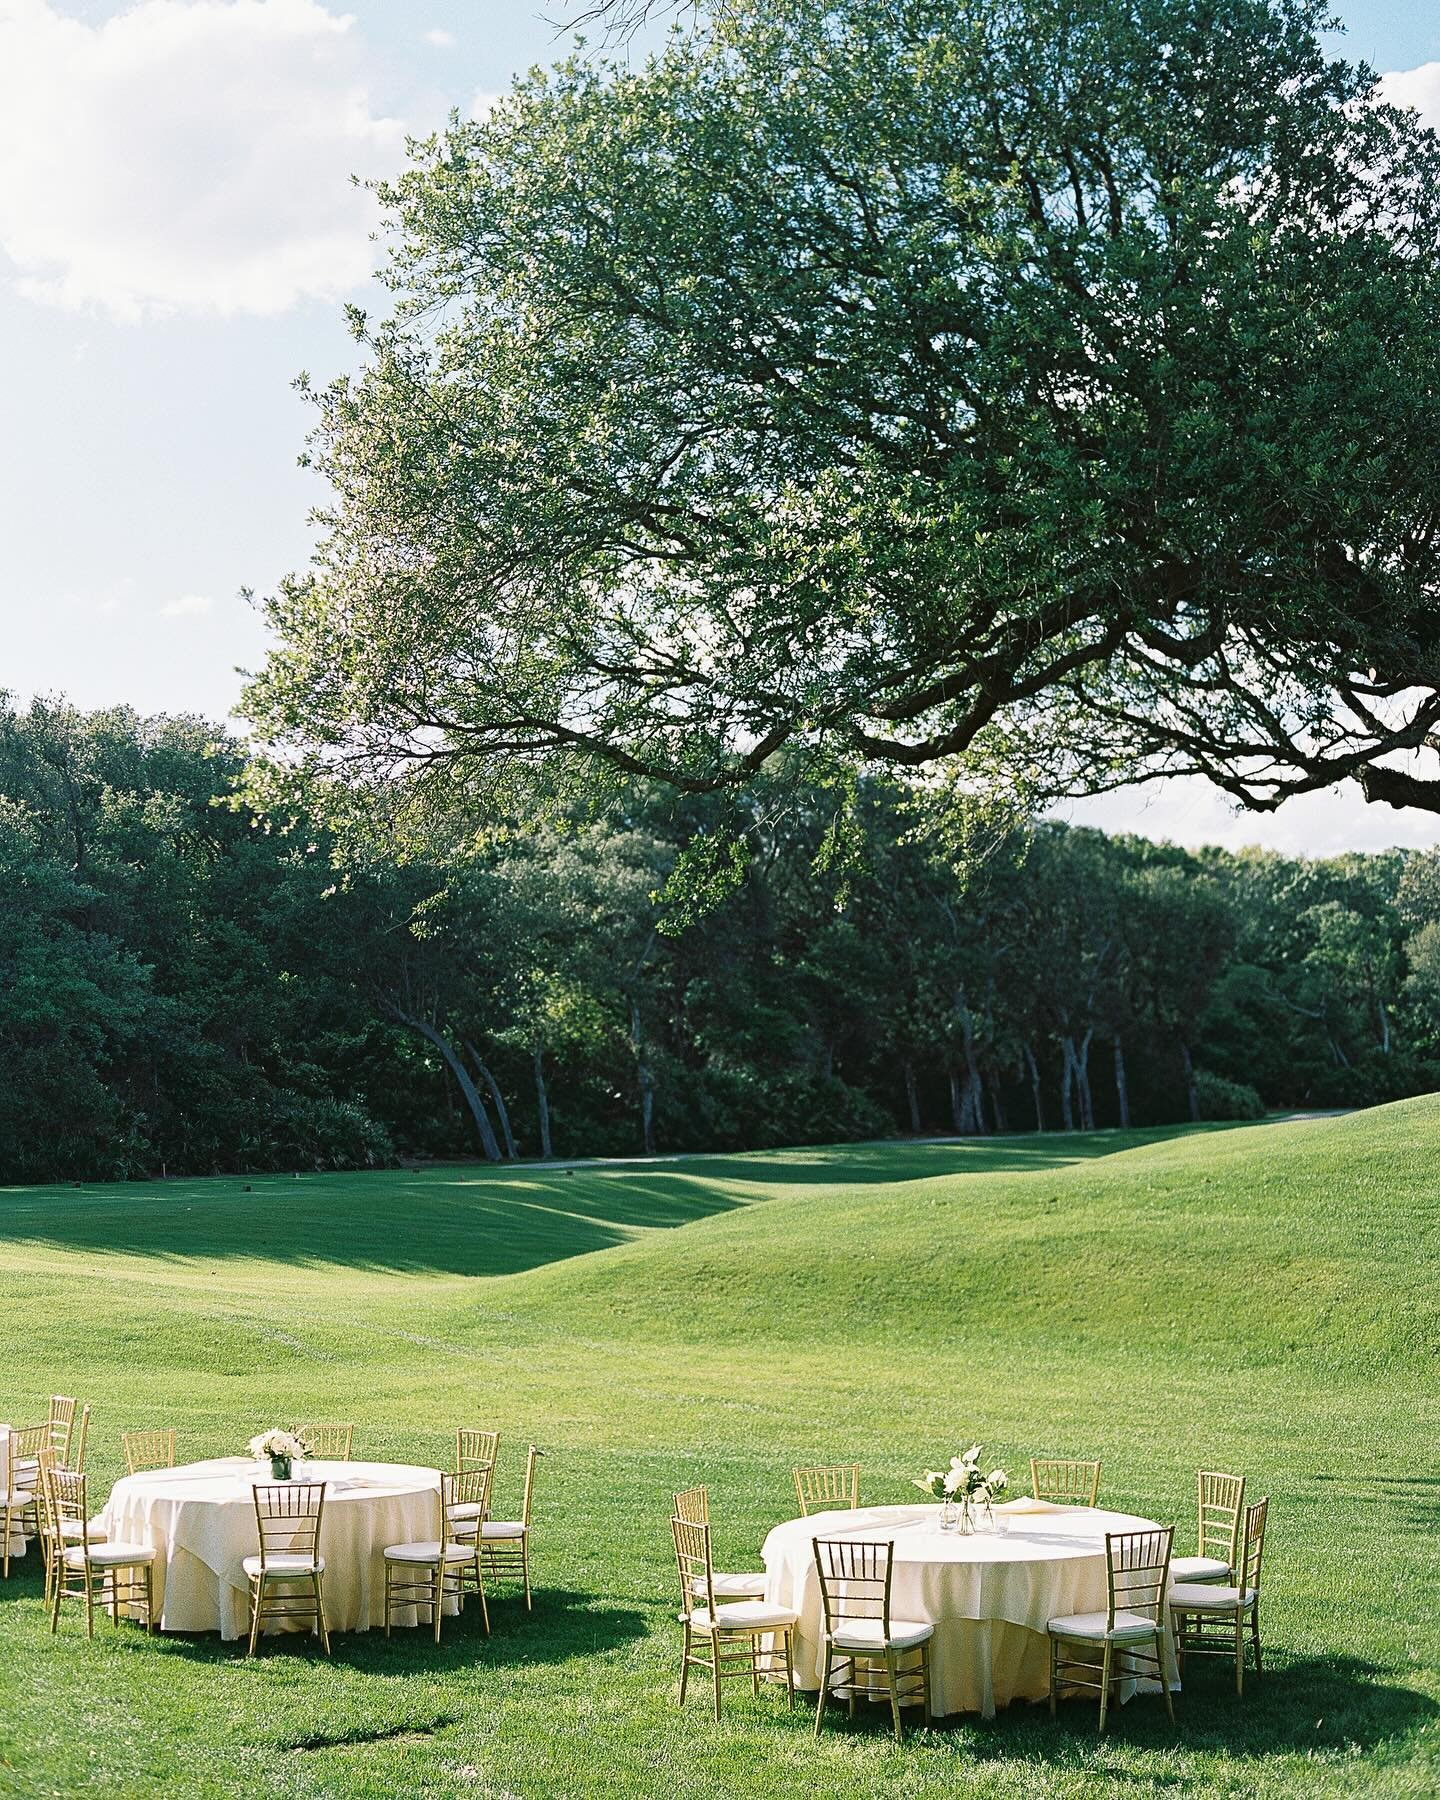 A perfect welcome party on the green - putting the &lsquo;fore&rsquo; in &lsquo;forever&rsquo;! ⛳️ 

Planner @collinskormanevents 
Photo @rachaelosbornephoto 
Venue @ritzcarltonameliaisland 

#ameliaislandwedding #ameliaislandweddings #flweddingplann